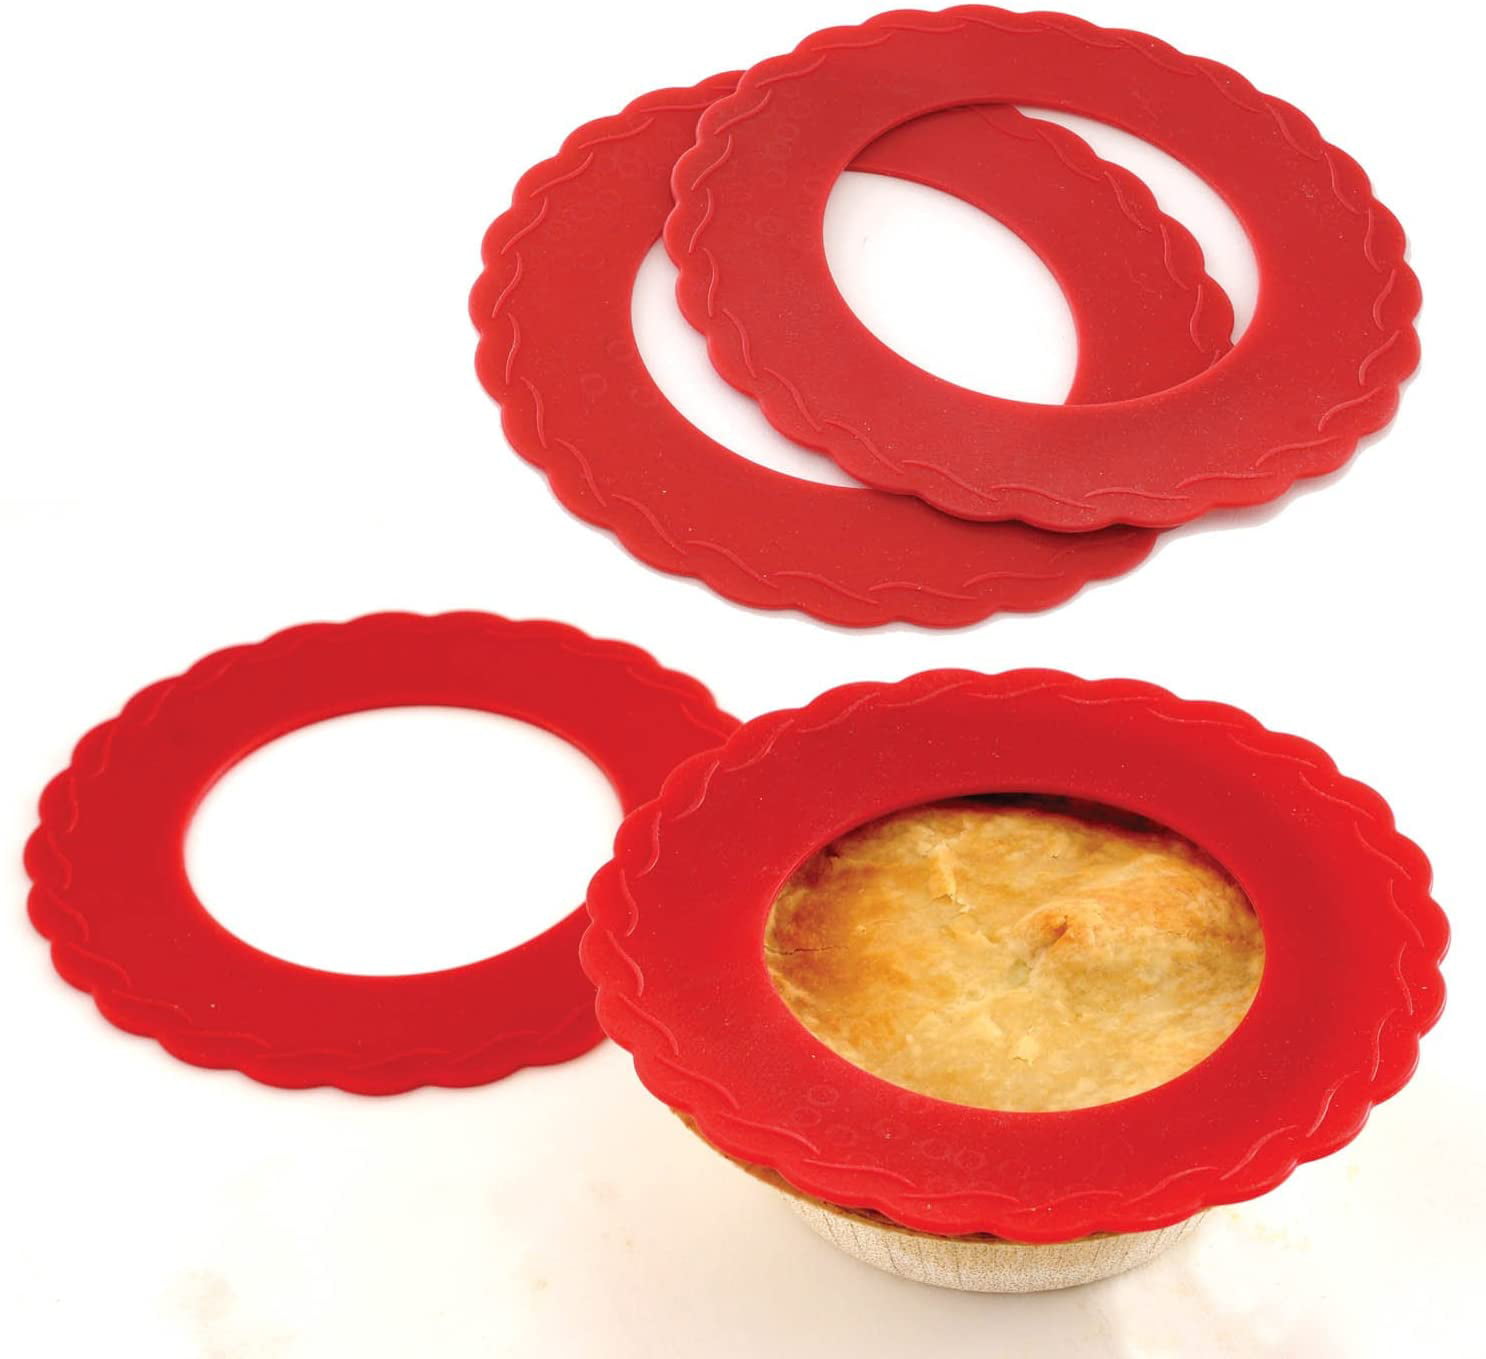 Mini Pie Pan Shields. Set of 4 Mini Silicone Crust Shields Protect Edge of 5 & 6 Pies From Burning 